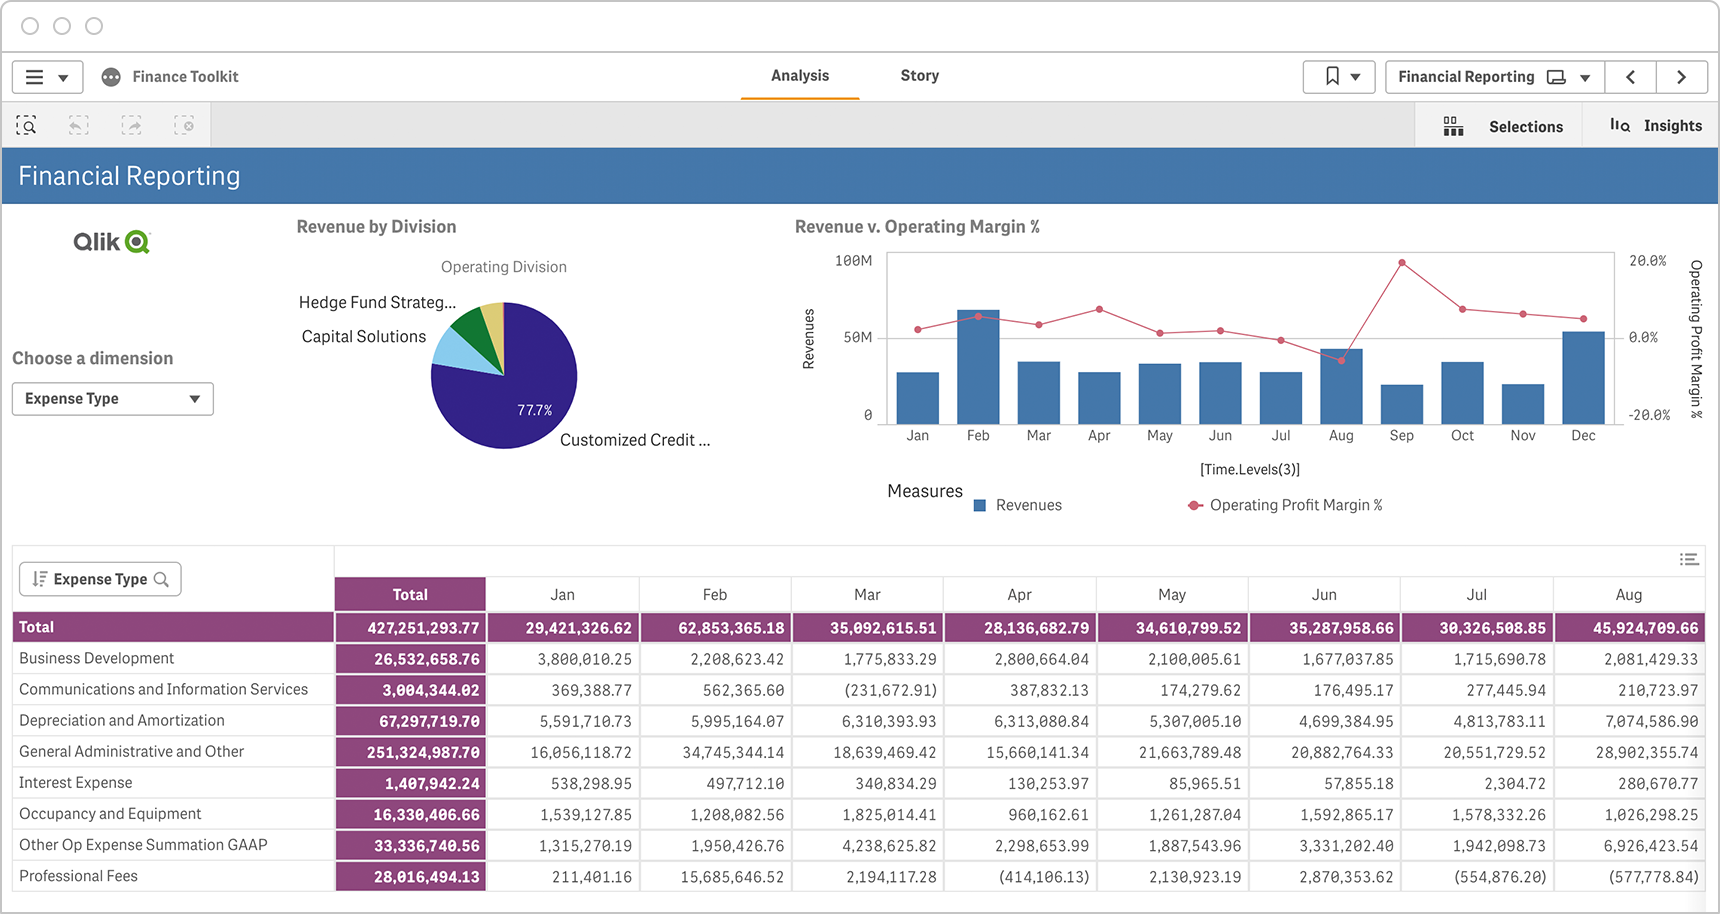 Executive Dashboards allow a CFO to drill into expense, cost center, and procurement data to discover the real cost of doing business, compare expenses by division, assess details of each cost center, or discover new ways to increase profitability.